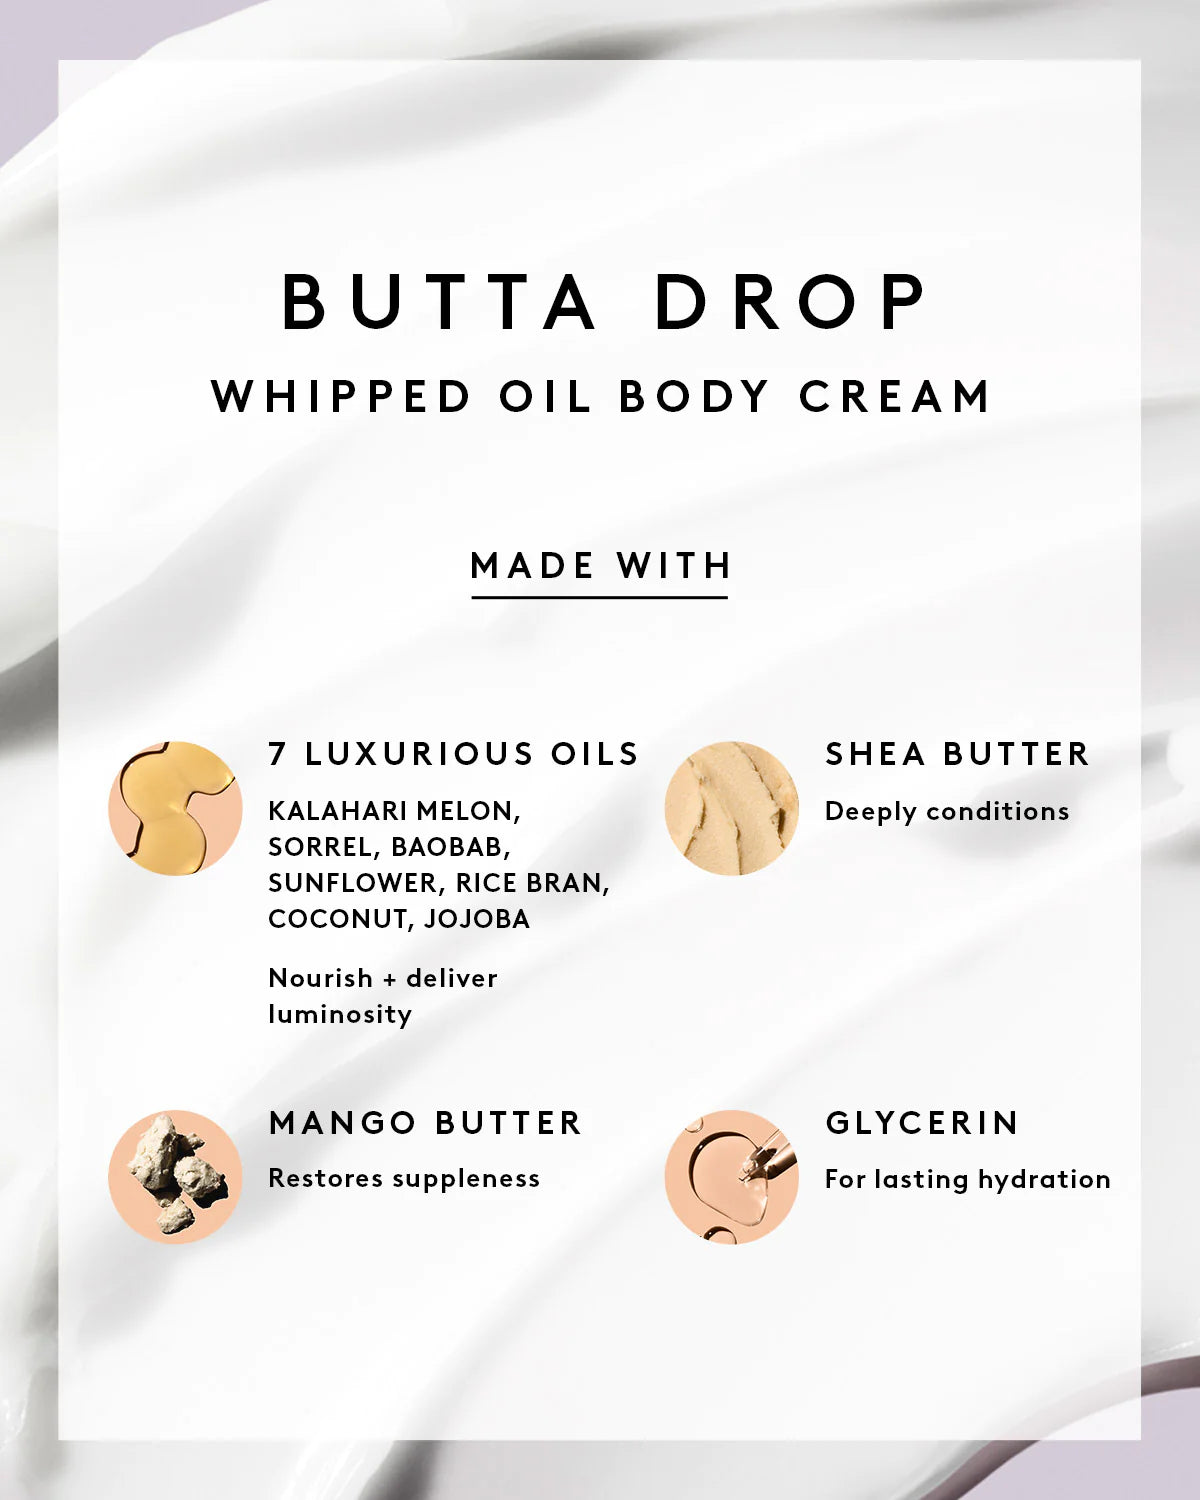 BUTTA DROP WHIPPED OIL BODY CREAM WITH TROPICAL OILS SHEA BUTTER